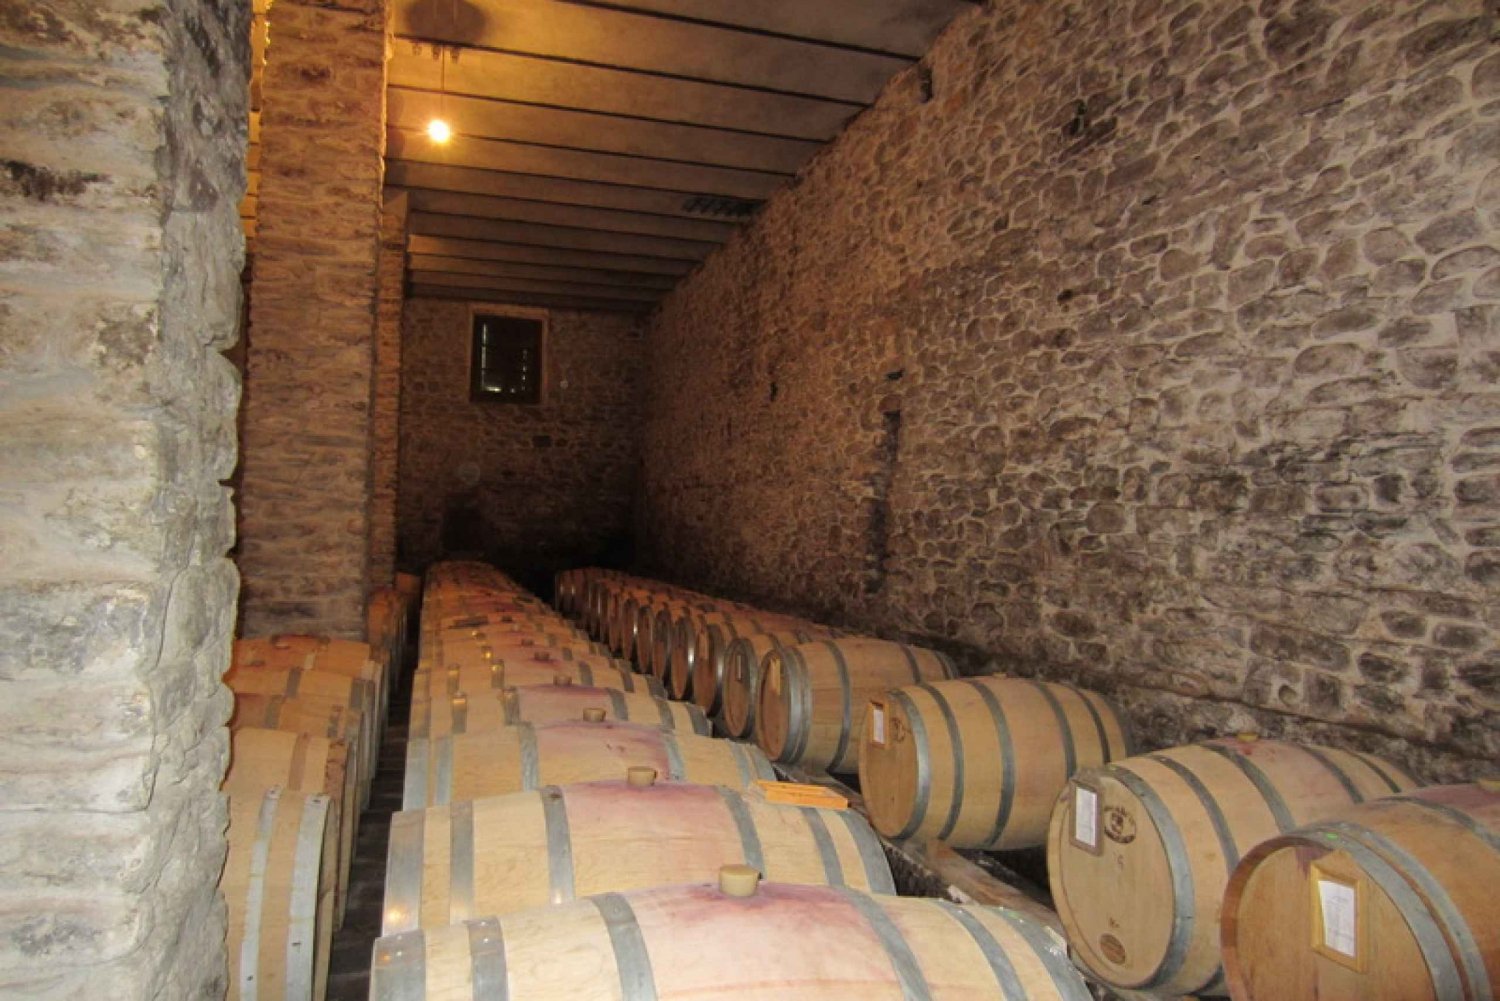 From Sofia: Full-Day Plovdiv Tour including Wine Tasting